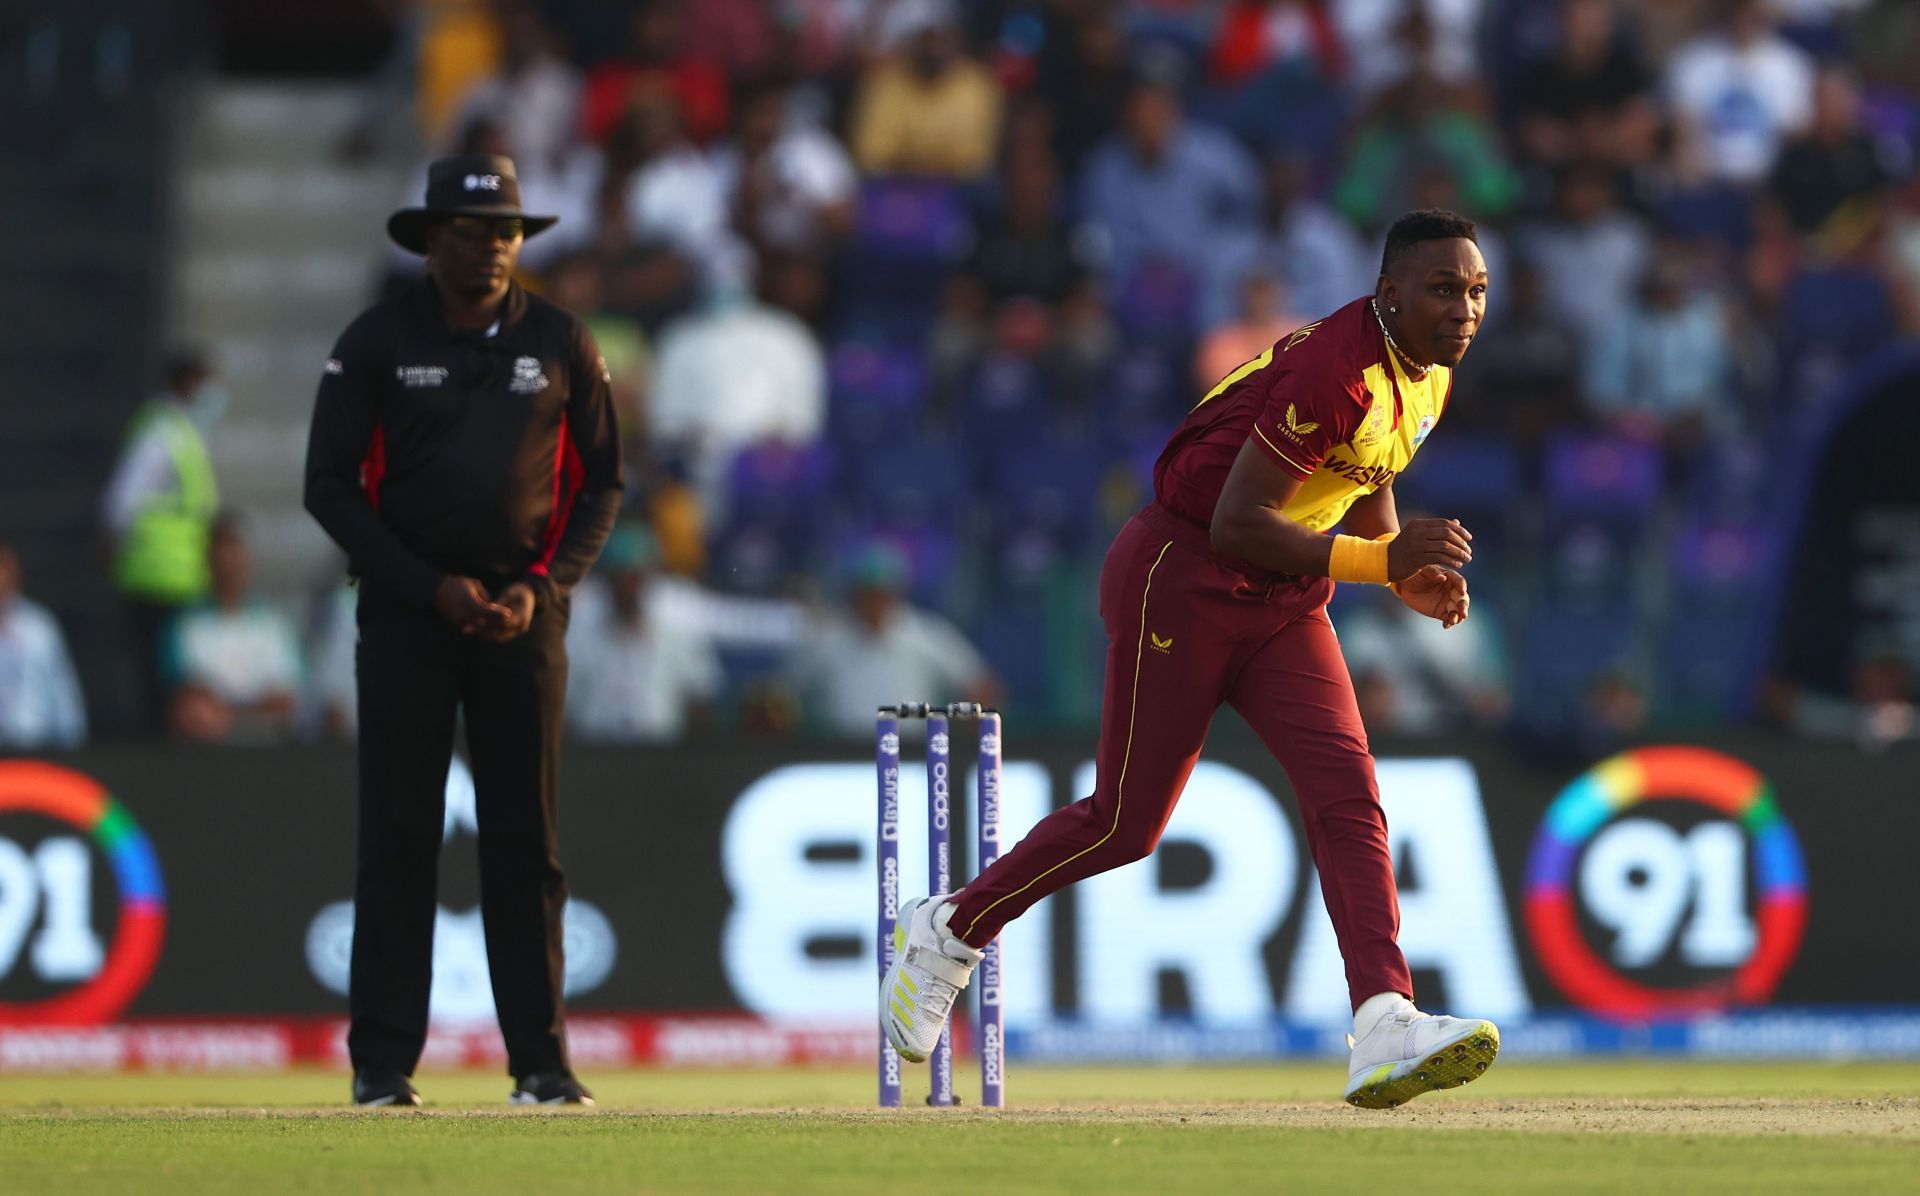 Dwayne Bravo in action during the T20 World Cup. Pic: Getty Images